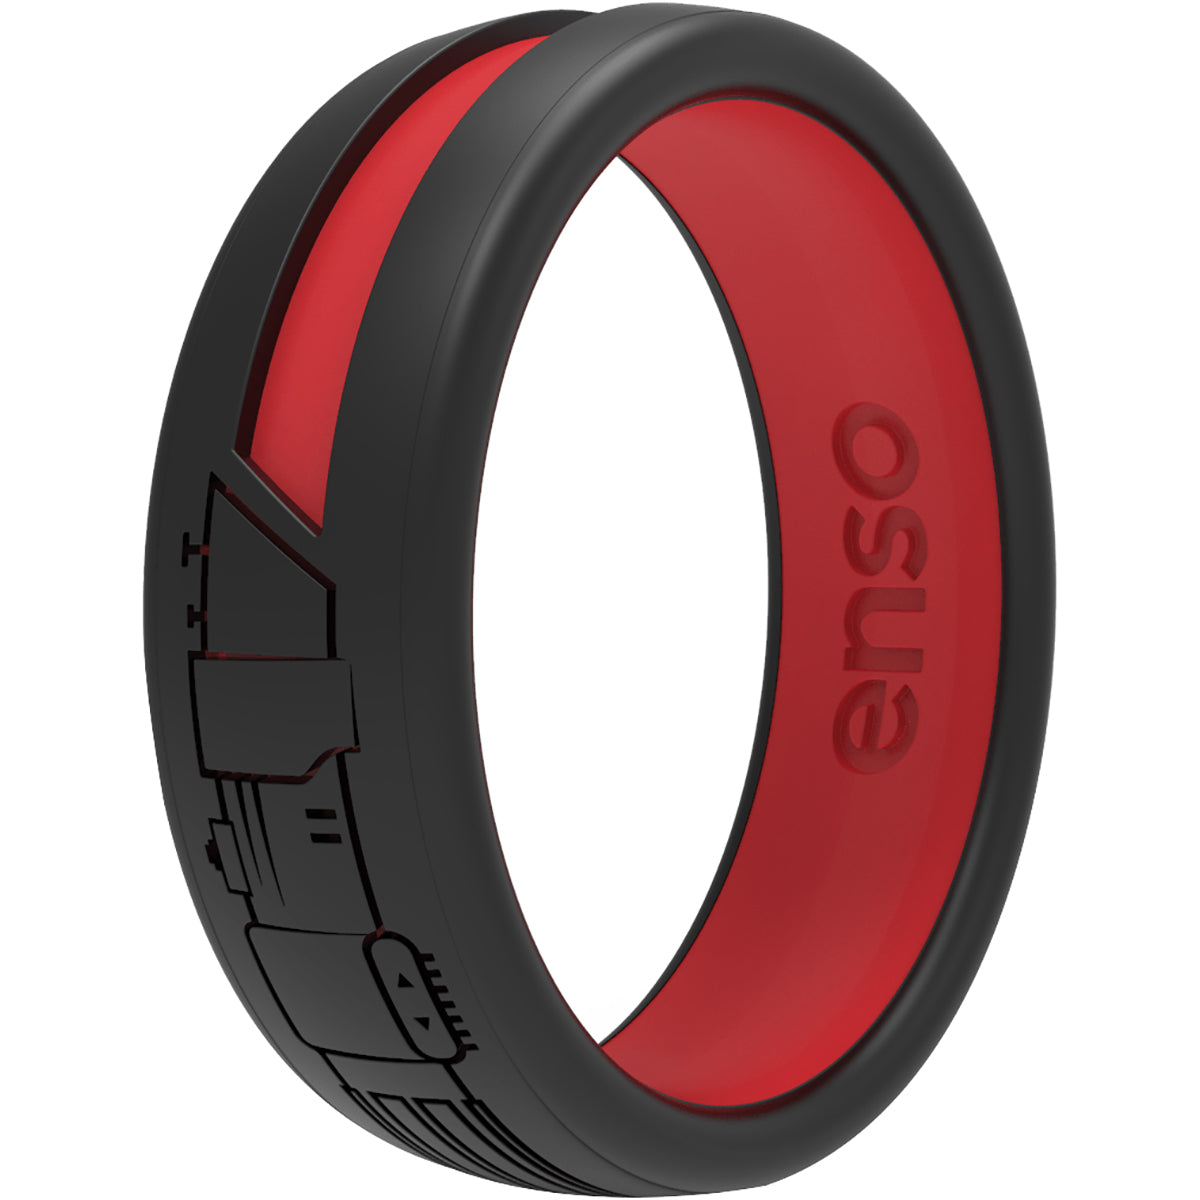 Enso Rings Star Wars Darth Vader Lightsaber Classic Silicone Ring - Black/Red Enso Rings